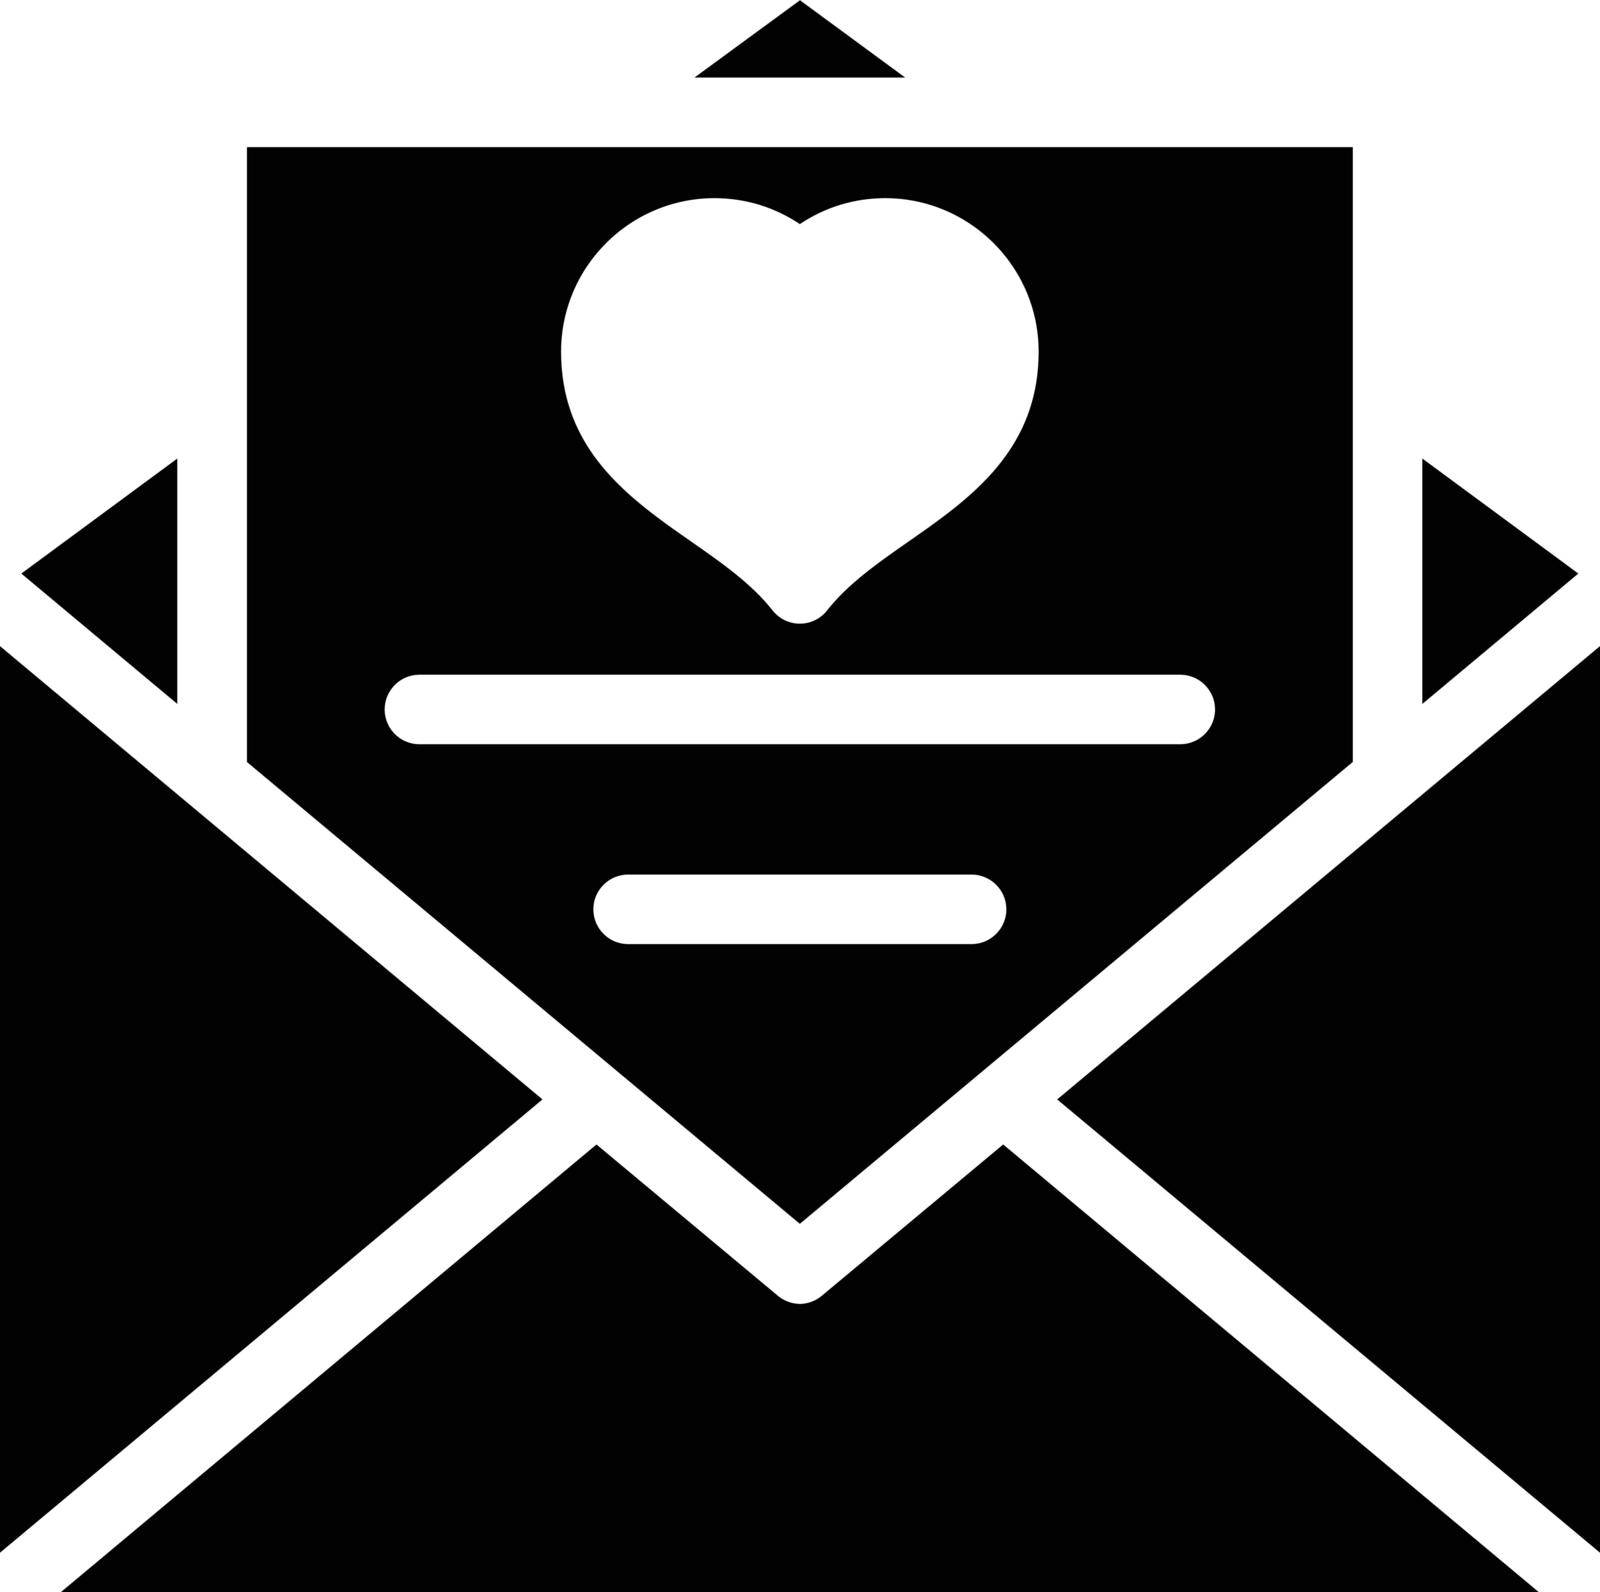 email by FlaticonsDesign